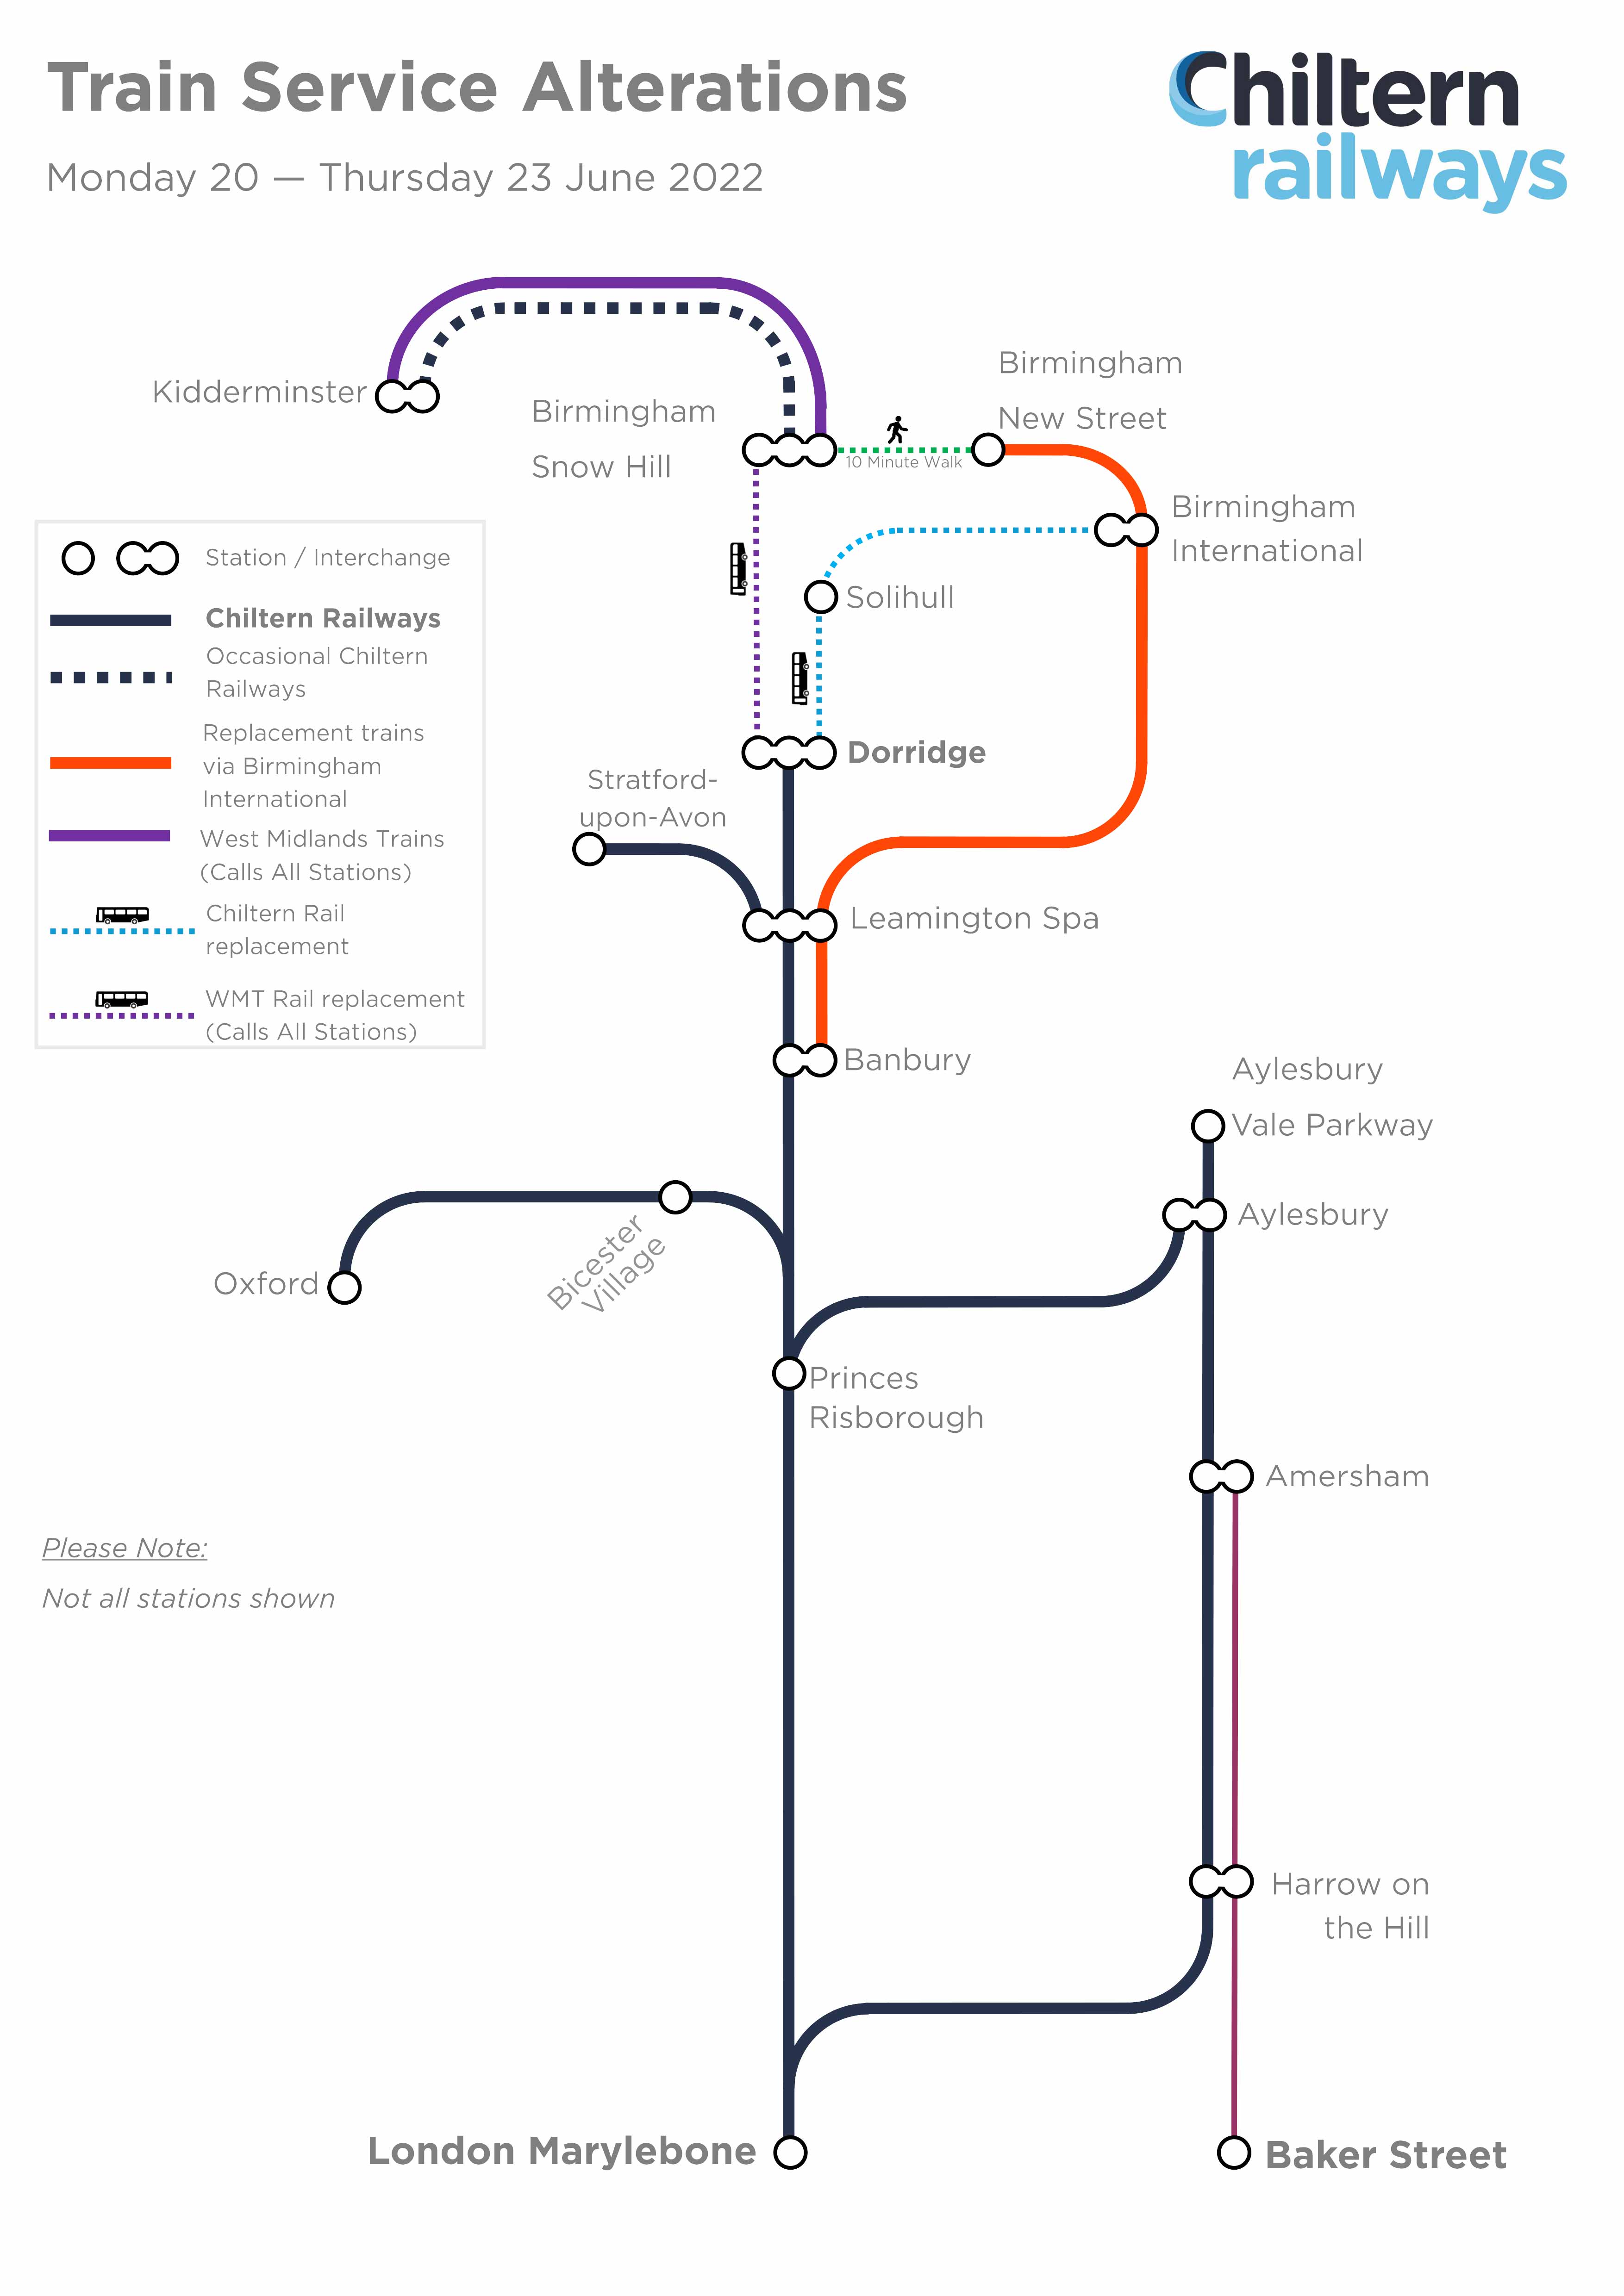 Route diagram showing train service alterations during the time period 20th-23rd June 2022